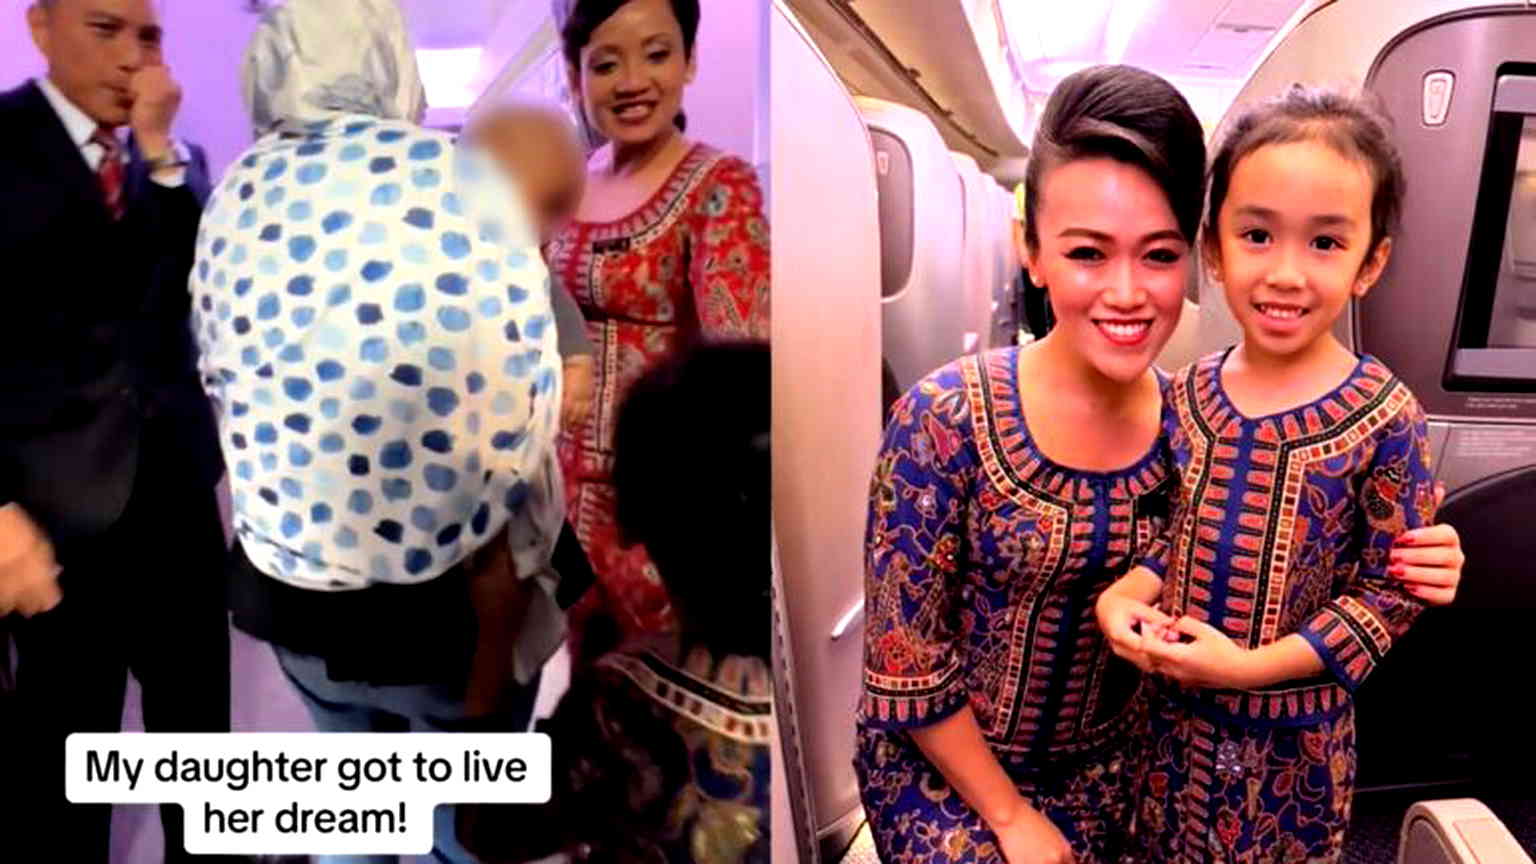 Watch: 5-year-old girl ‘lives her dream’ by wearing sarong kebaya on Singapore Airlines flight